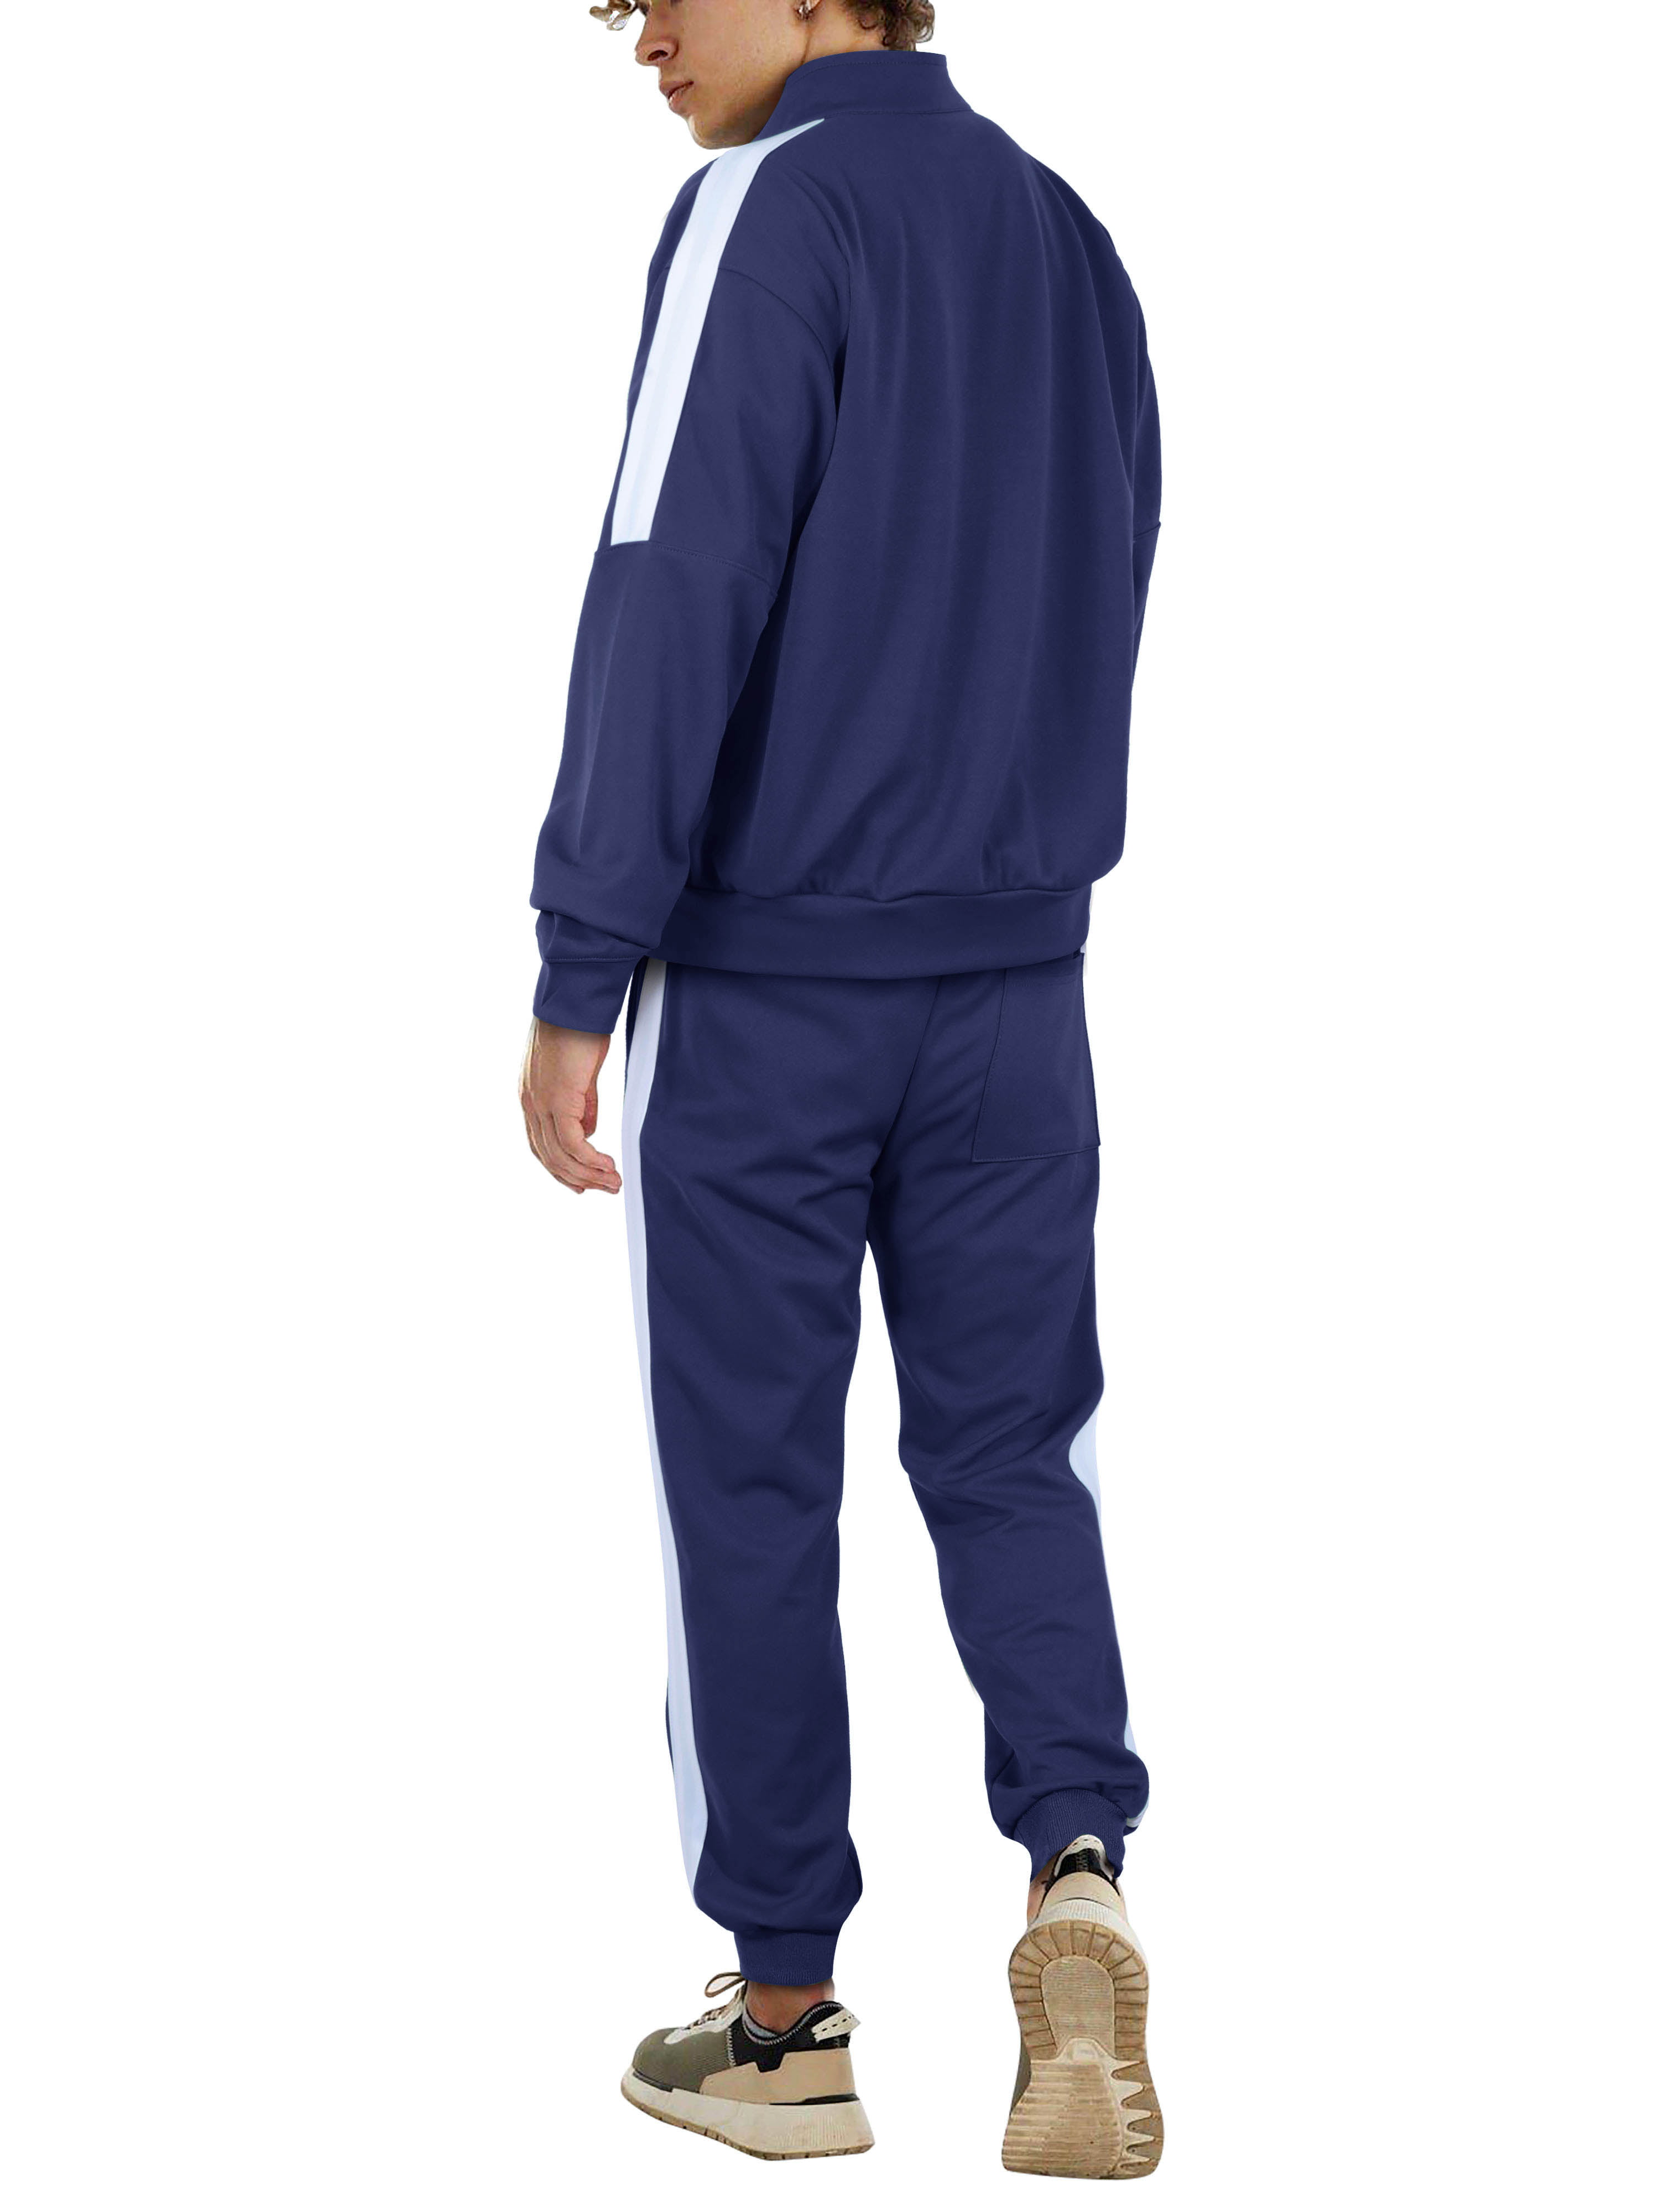 Ma Croix Mens Tracksuit USA Made Striped Active Workout Casual Sweat Suit  Combo